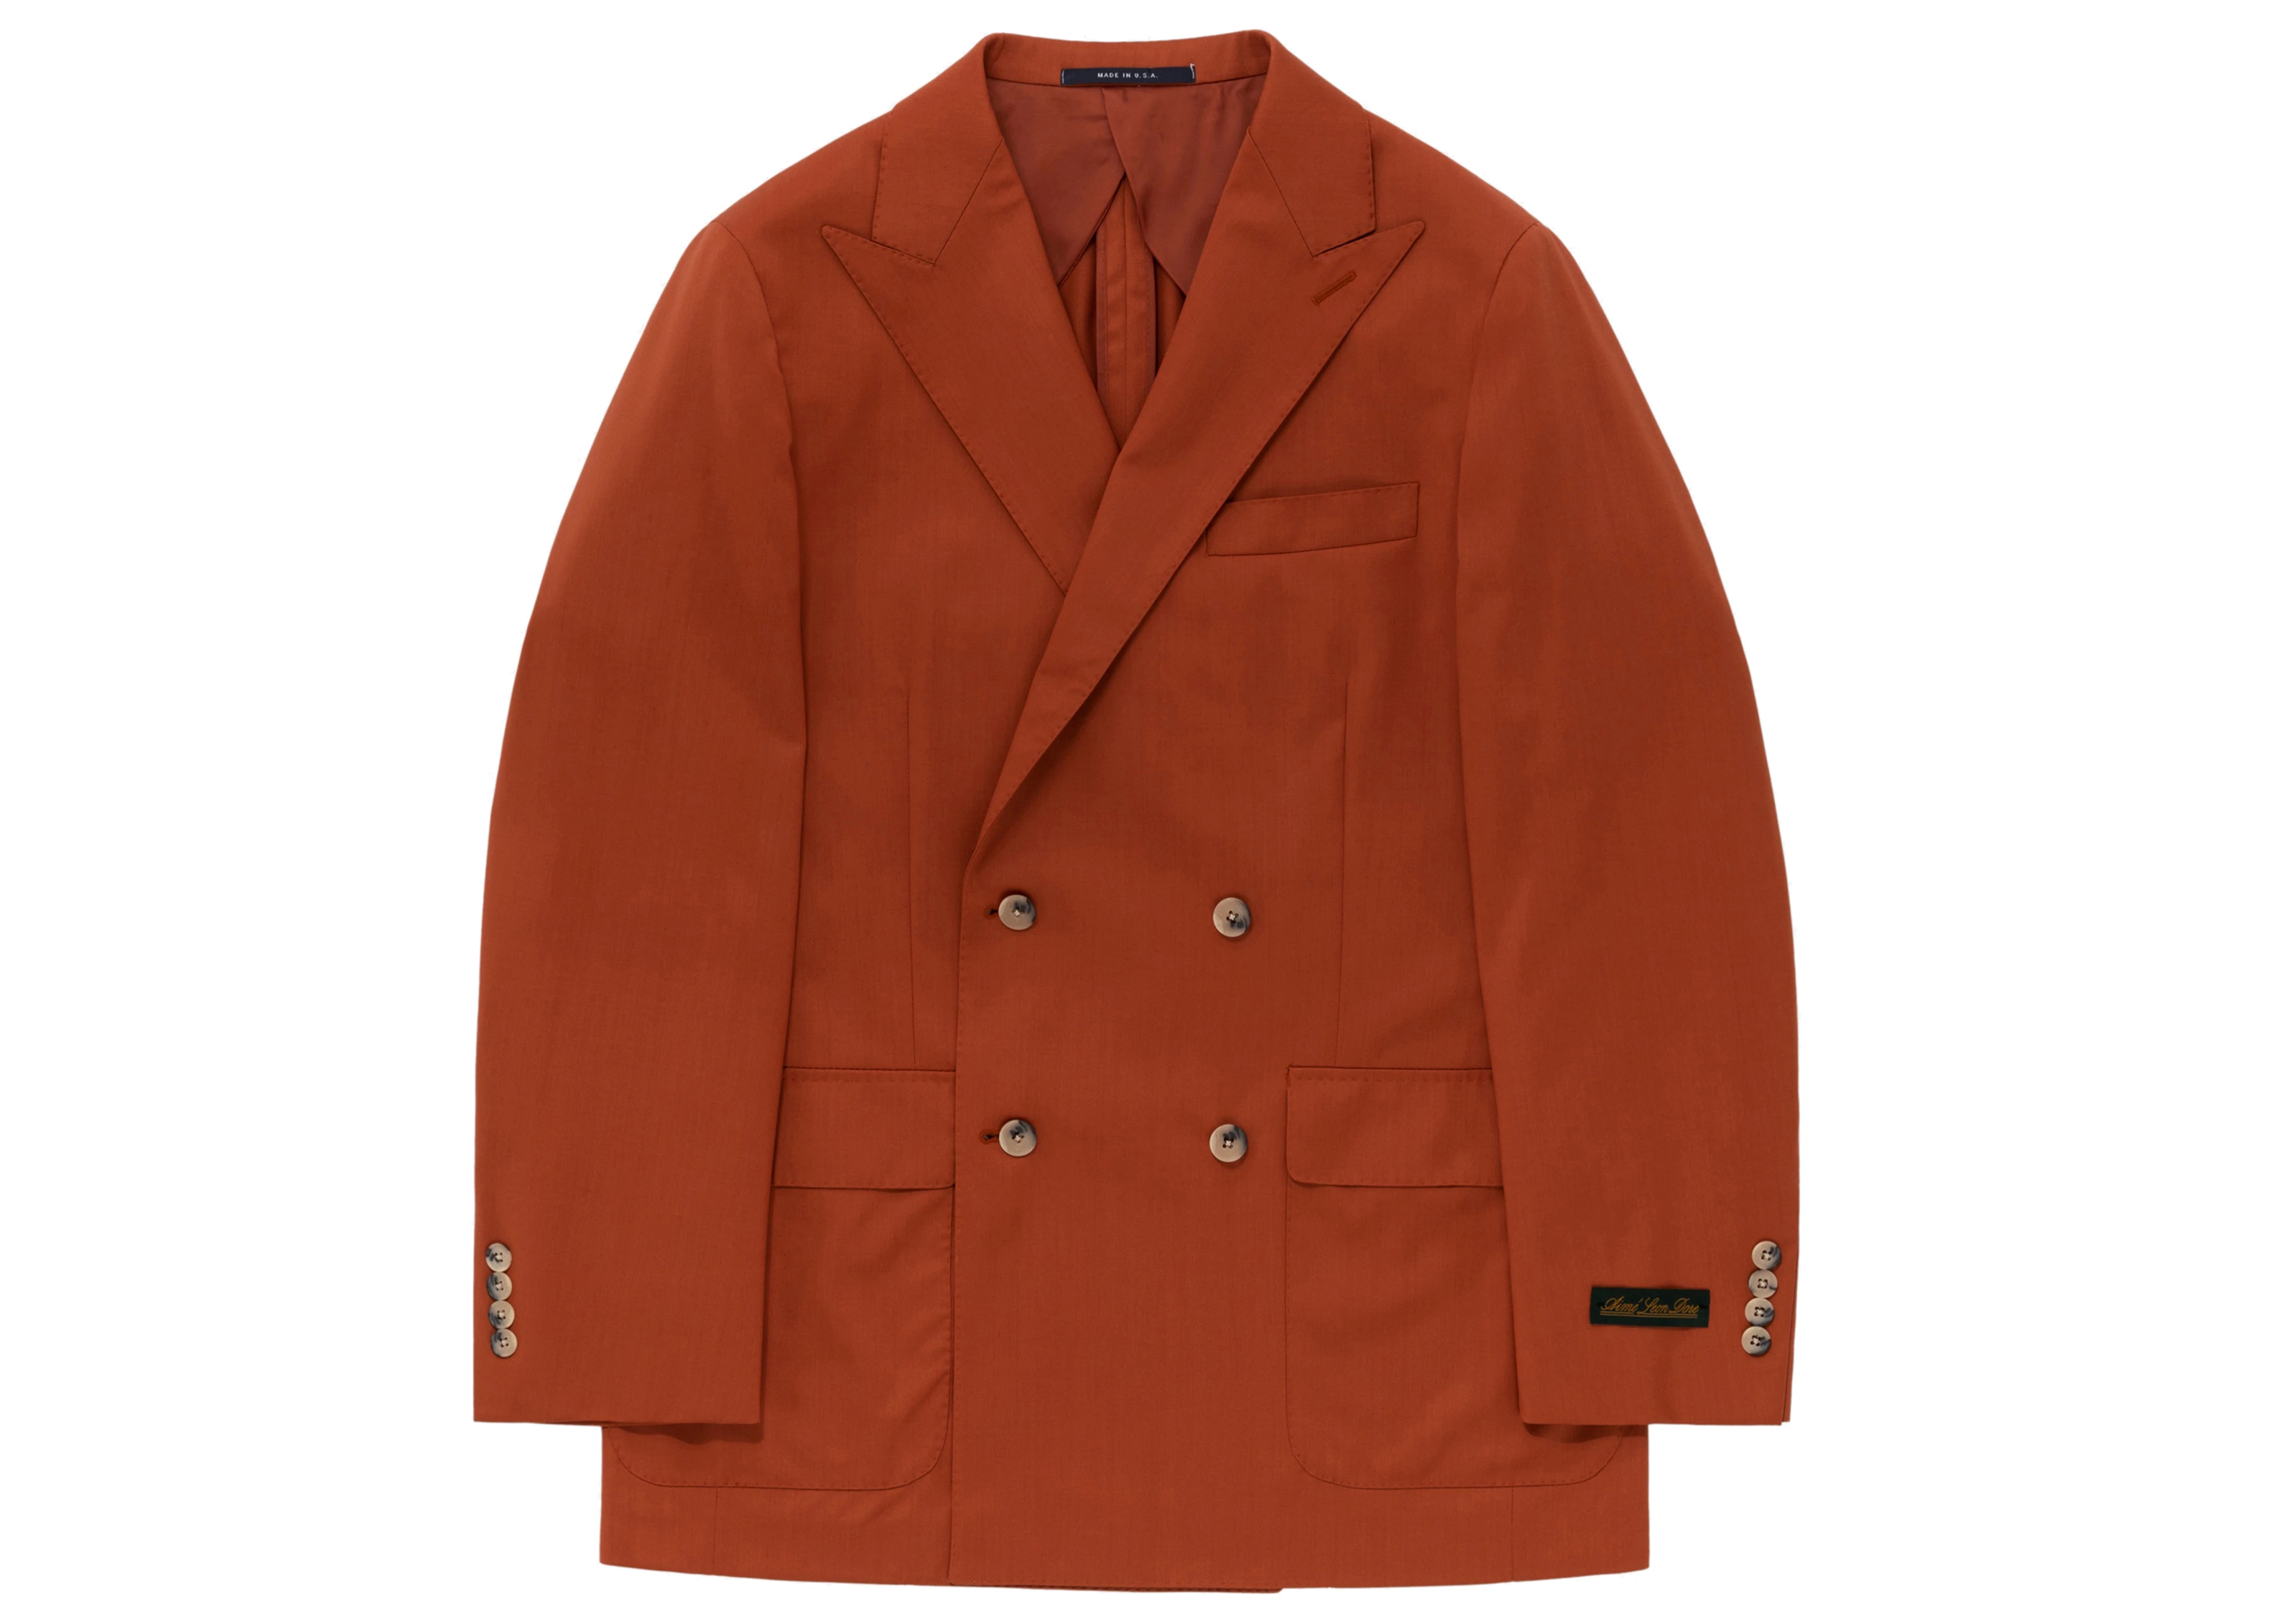 Aime Leon Dore Double-Breasted Tropical Wool Suit Jacket Orange 